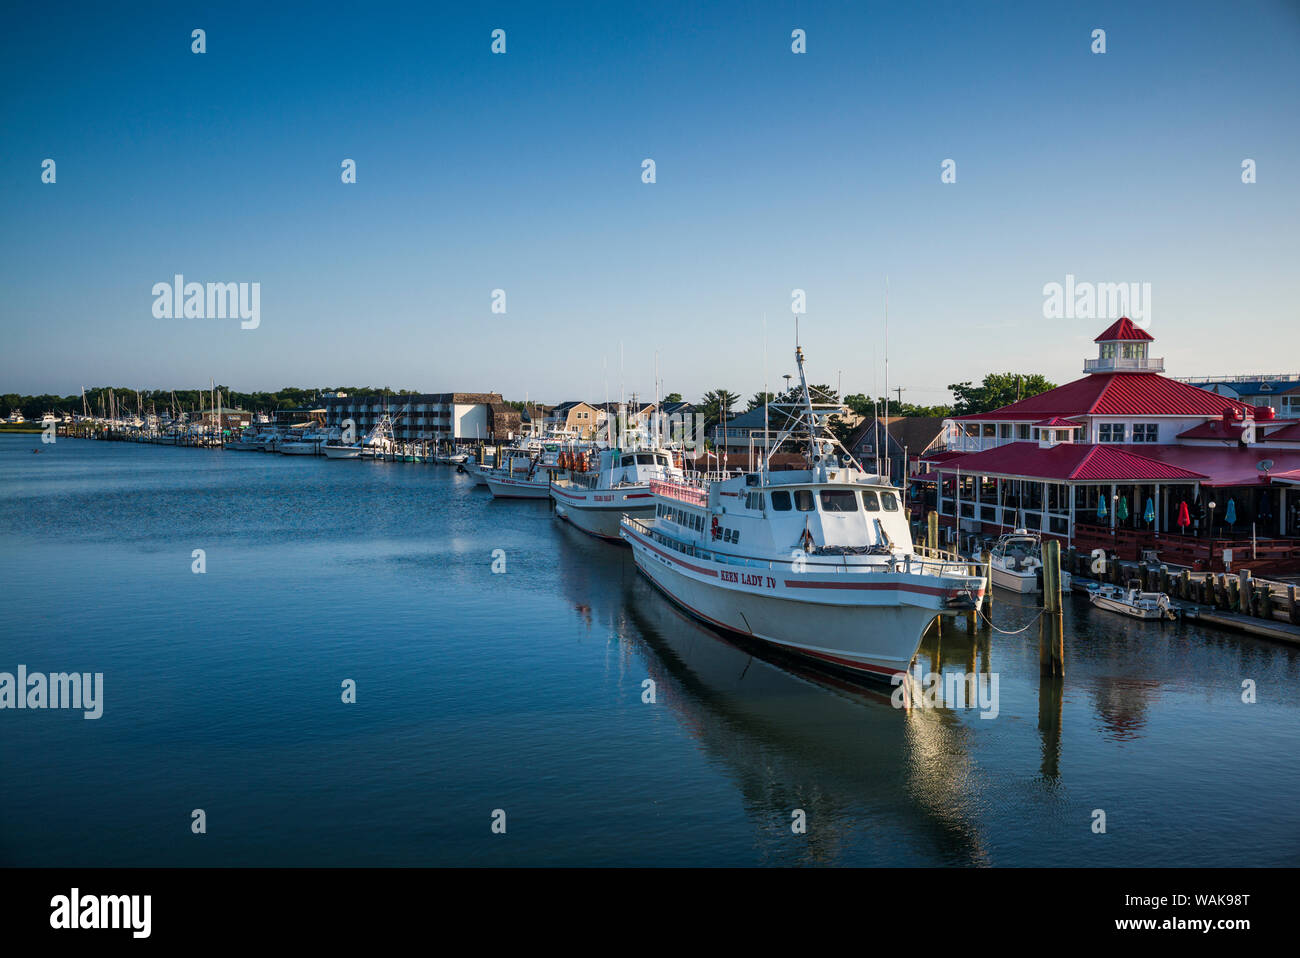 USA, Delaware, Lewes. Waterfront view along the Lewes and Rehoboth Canal Stock Photo